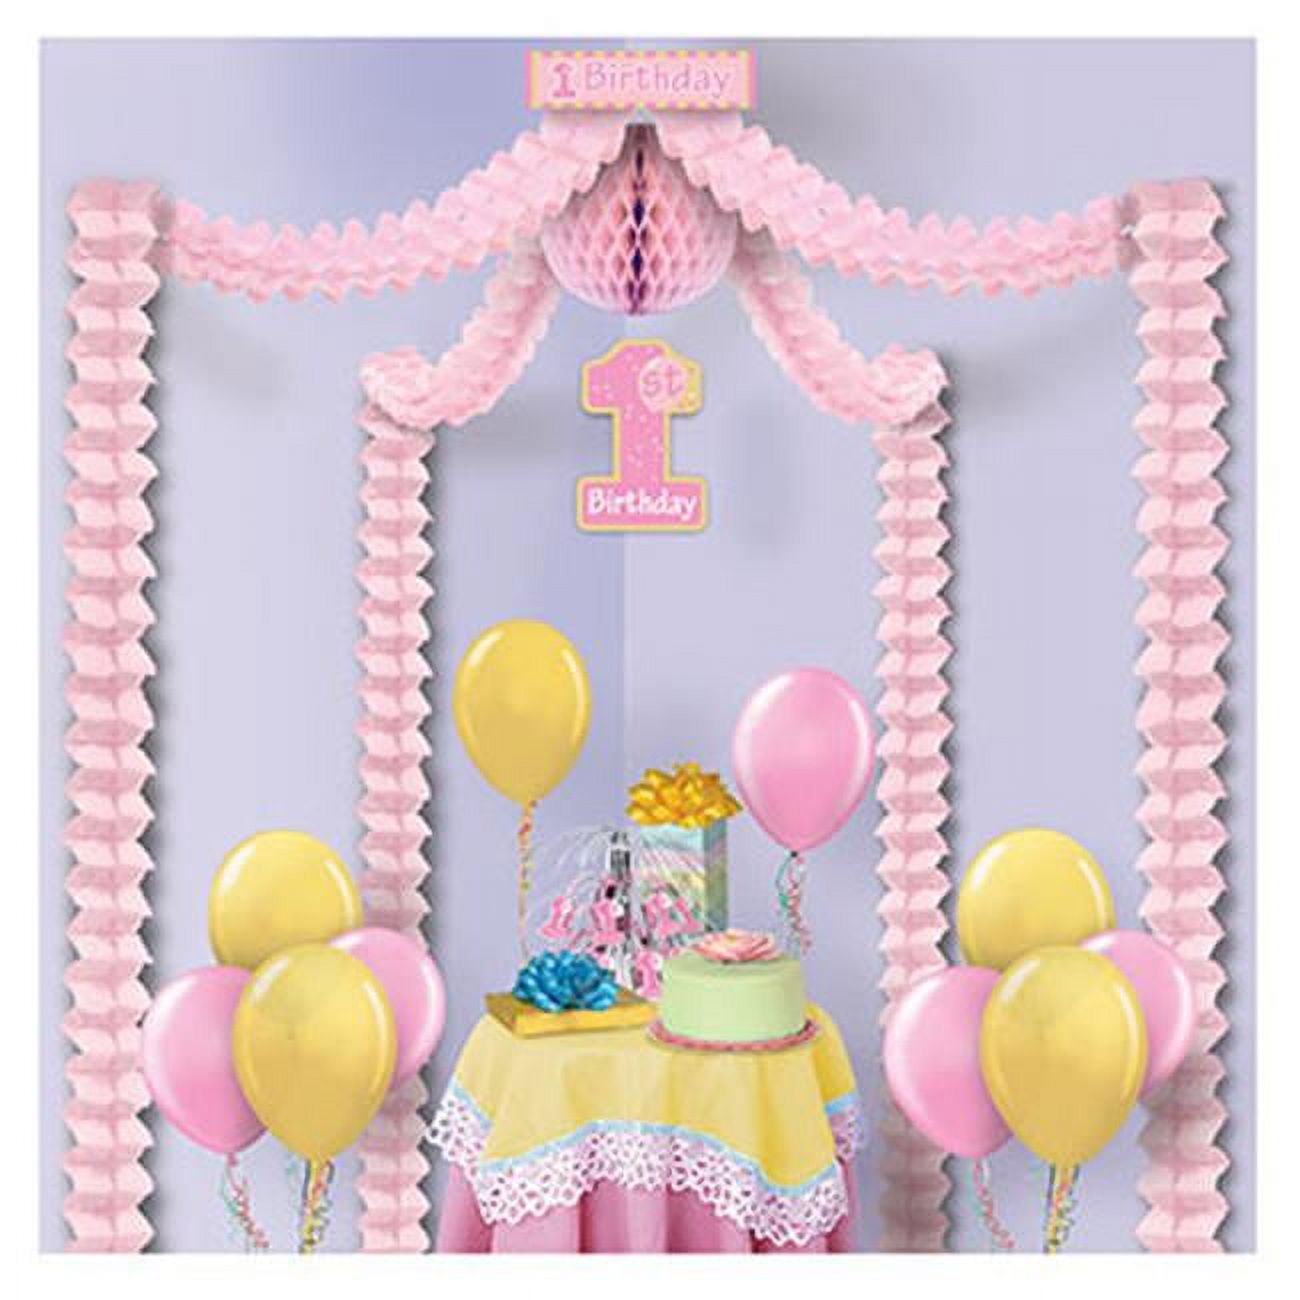 59244-p 1st Birthday Party Canopy - Pink, Yellow & White, Pack Of 6 - Multicolor